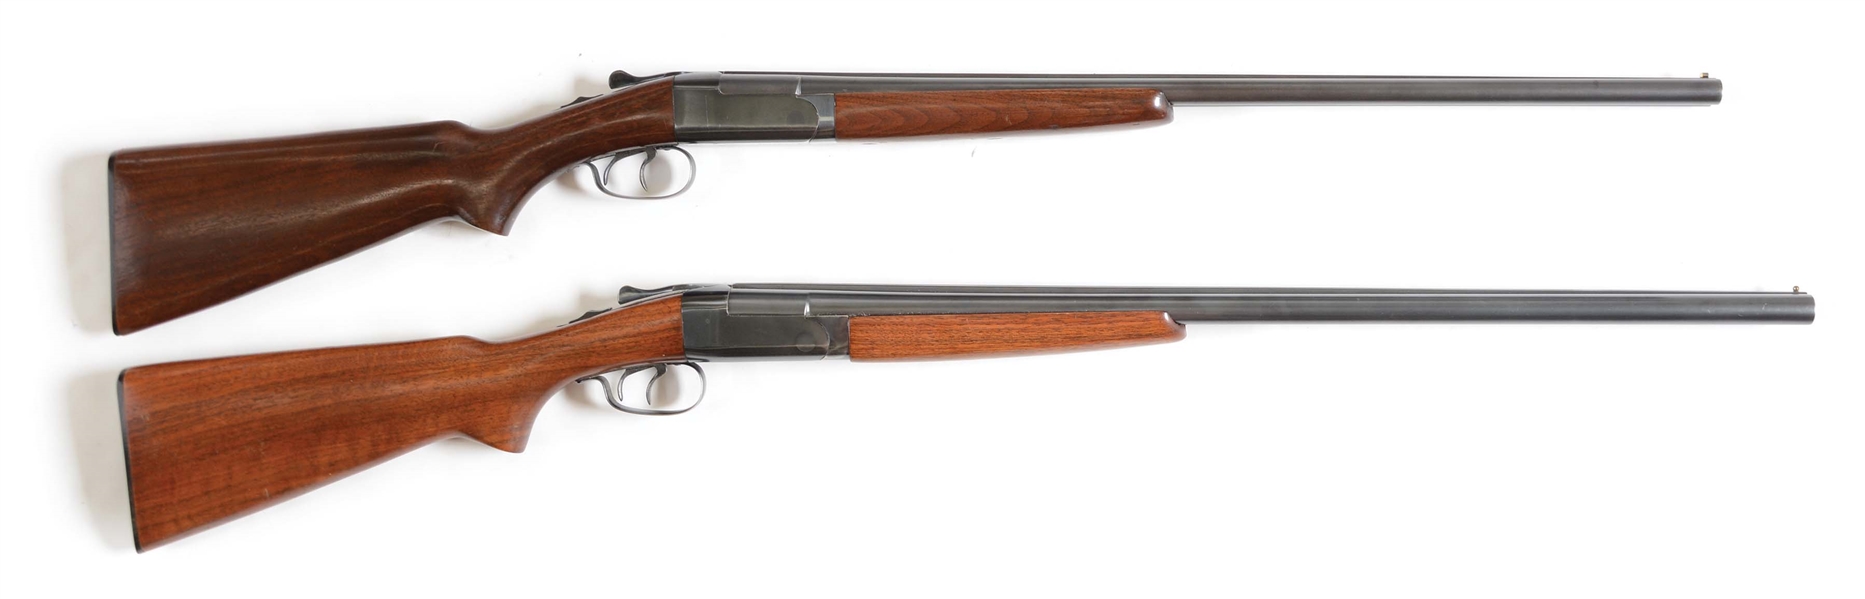 (C) LOT OF TWO: FINE SET OF POST-WAR WINCHESTER MODEL 24 SIDE BY SIDE SHOTGUNS - 20 & 12 BORE.